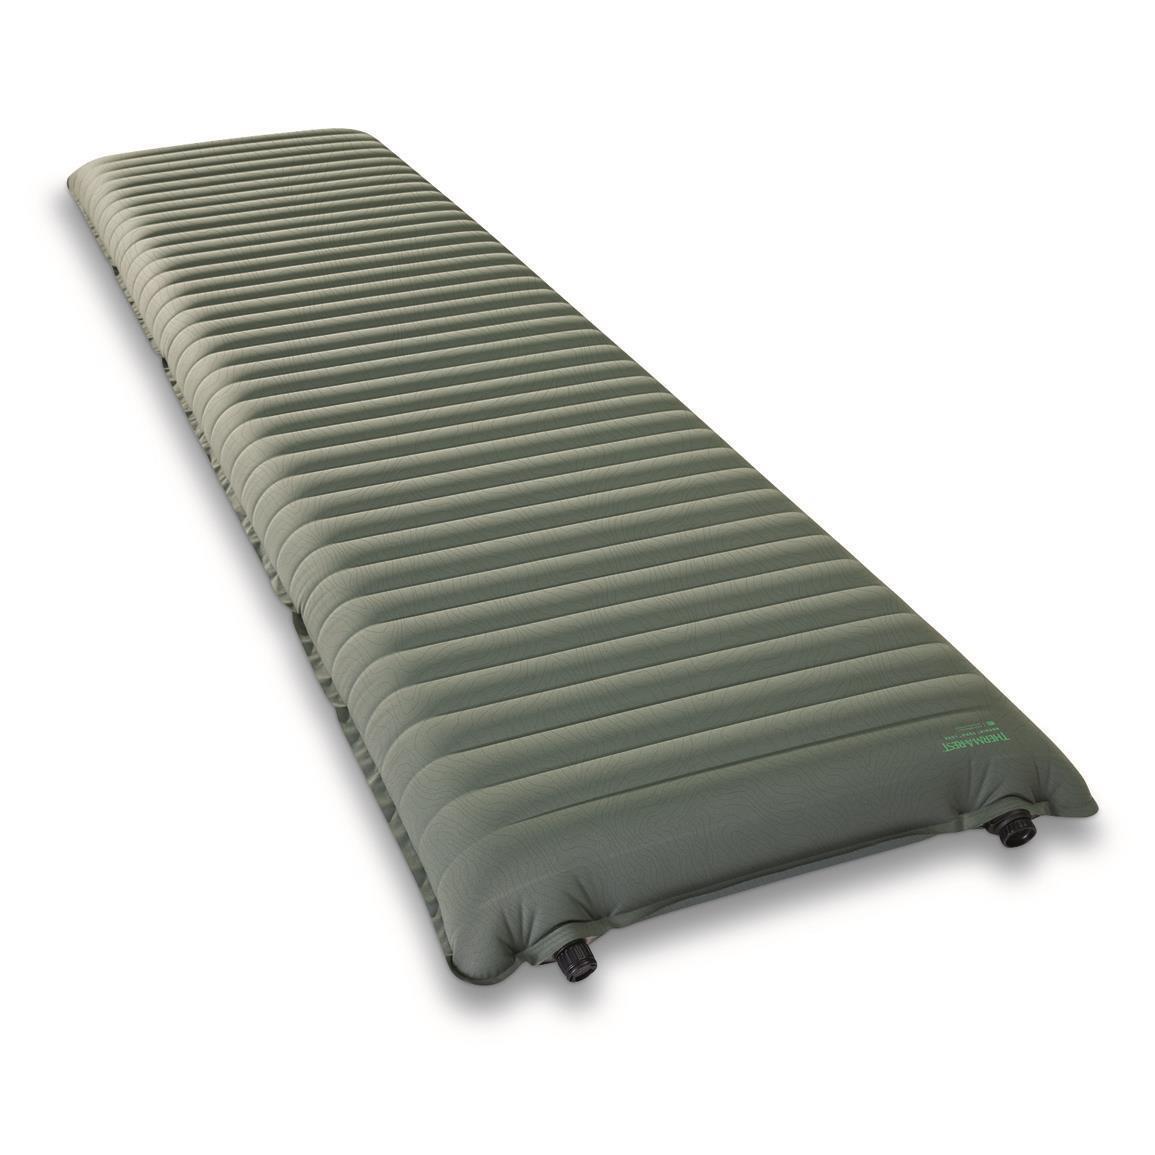 New Therm-a-Rest NeoAir Topo Luxe Camping Sleeping Pad Multiple Sizes, Green